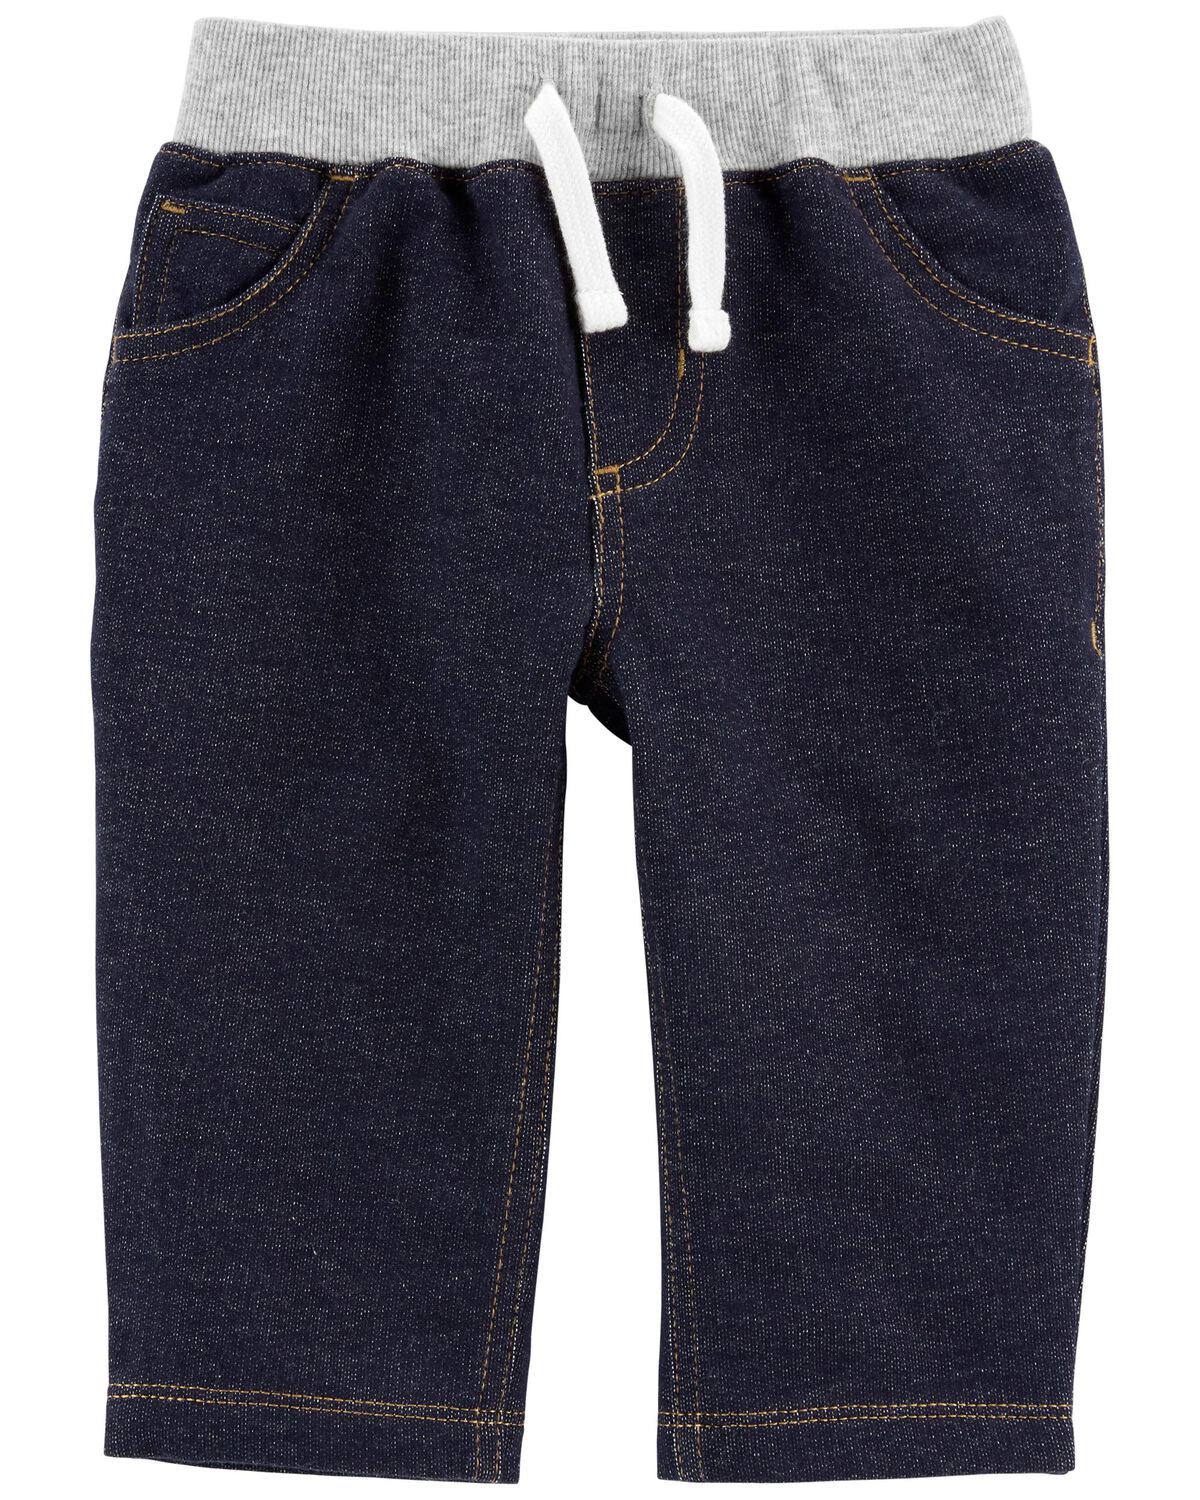 Navy Baby Pull-On Knit Denim Pants | carters.com